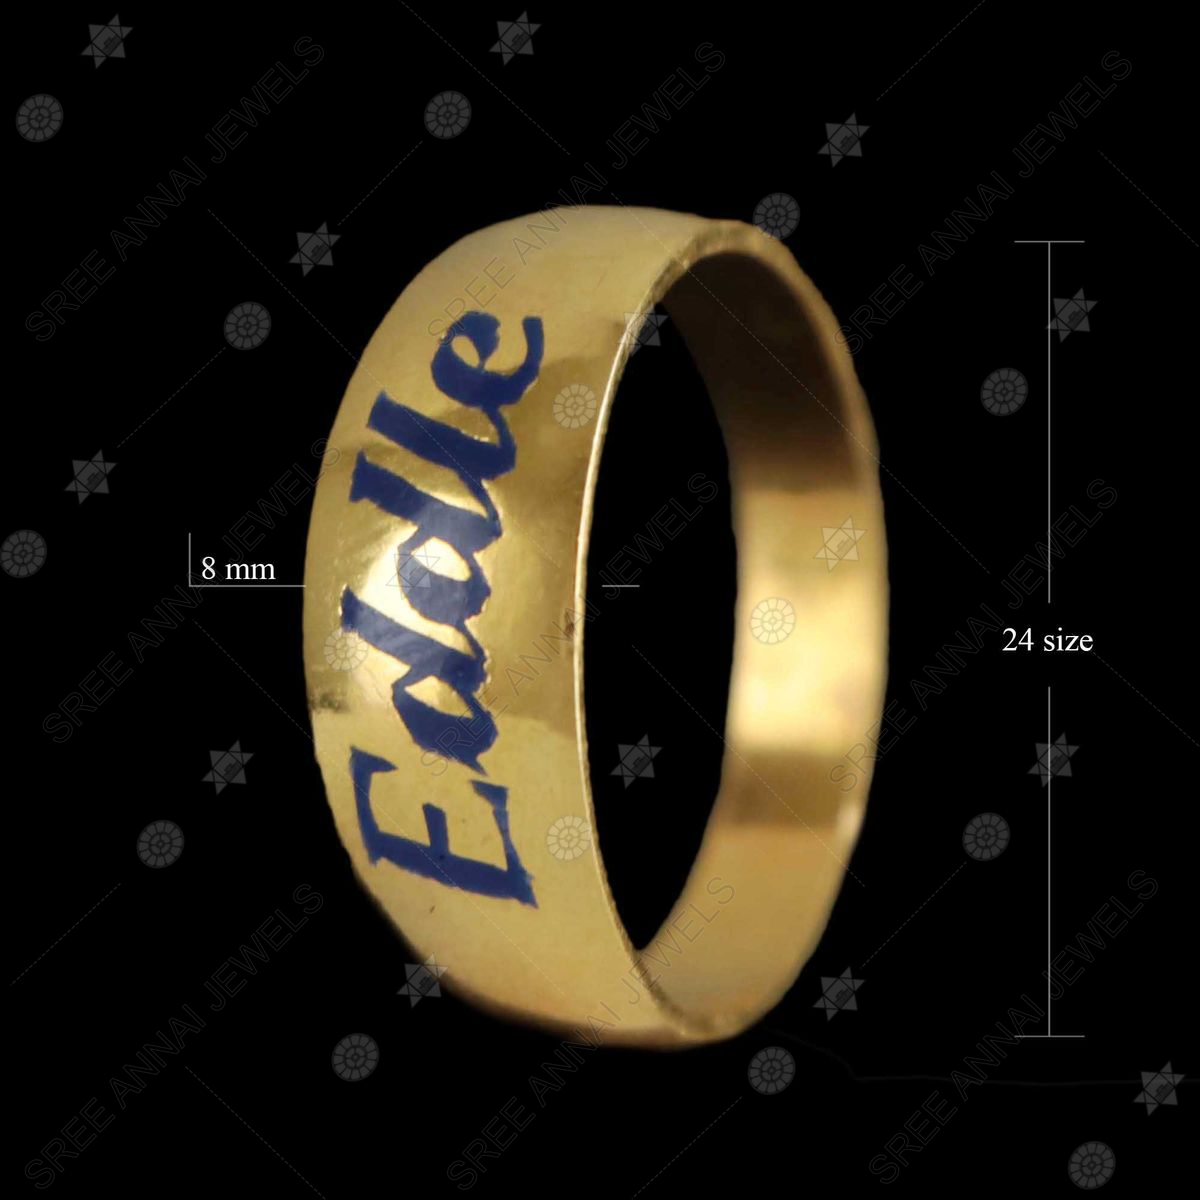 Personalised Diamond Gold-Plated Silver Ladies' Ring: 'Eternity'  Personalised Diamond Ring